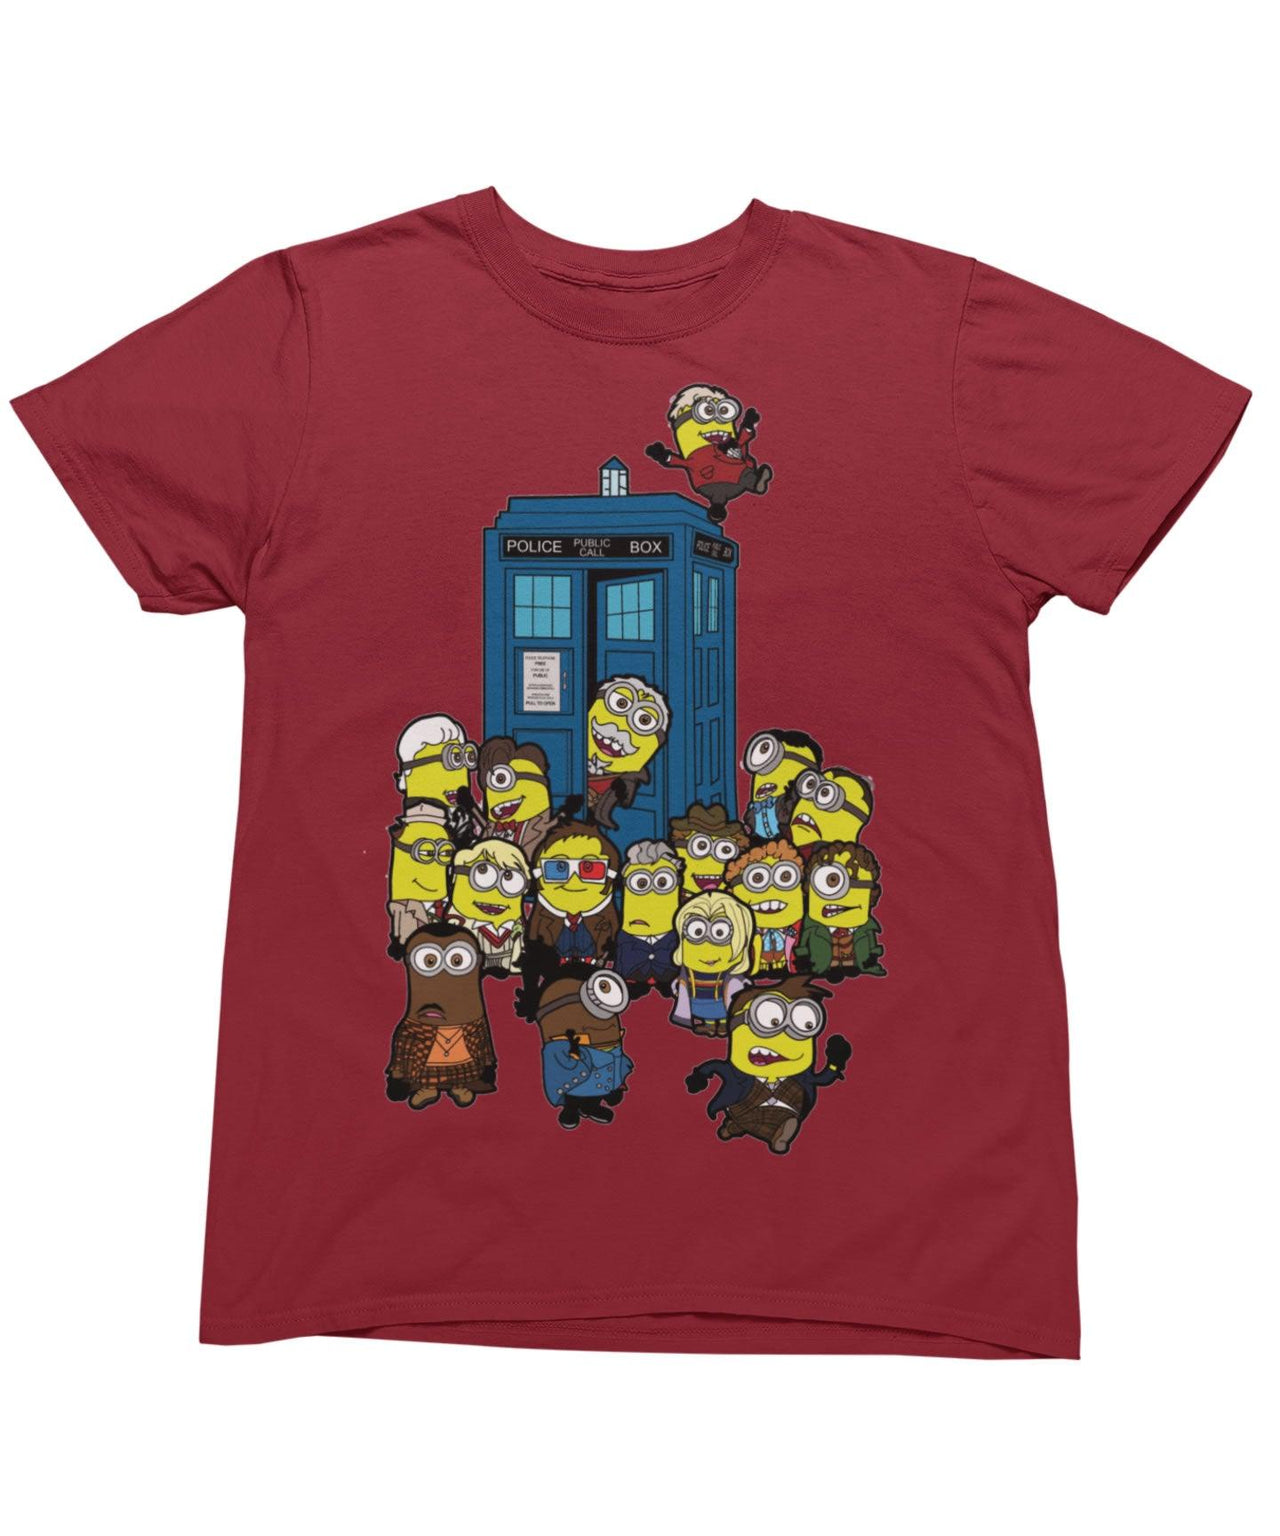 Top Notchy Doctor Minions Men's/Unisex Unisex T-Shirt For Men And Women 8Ball